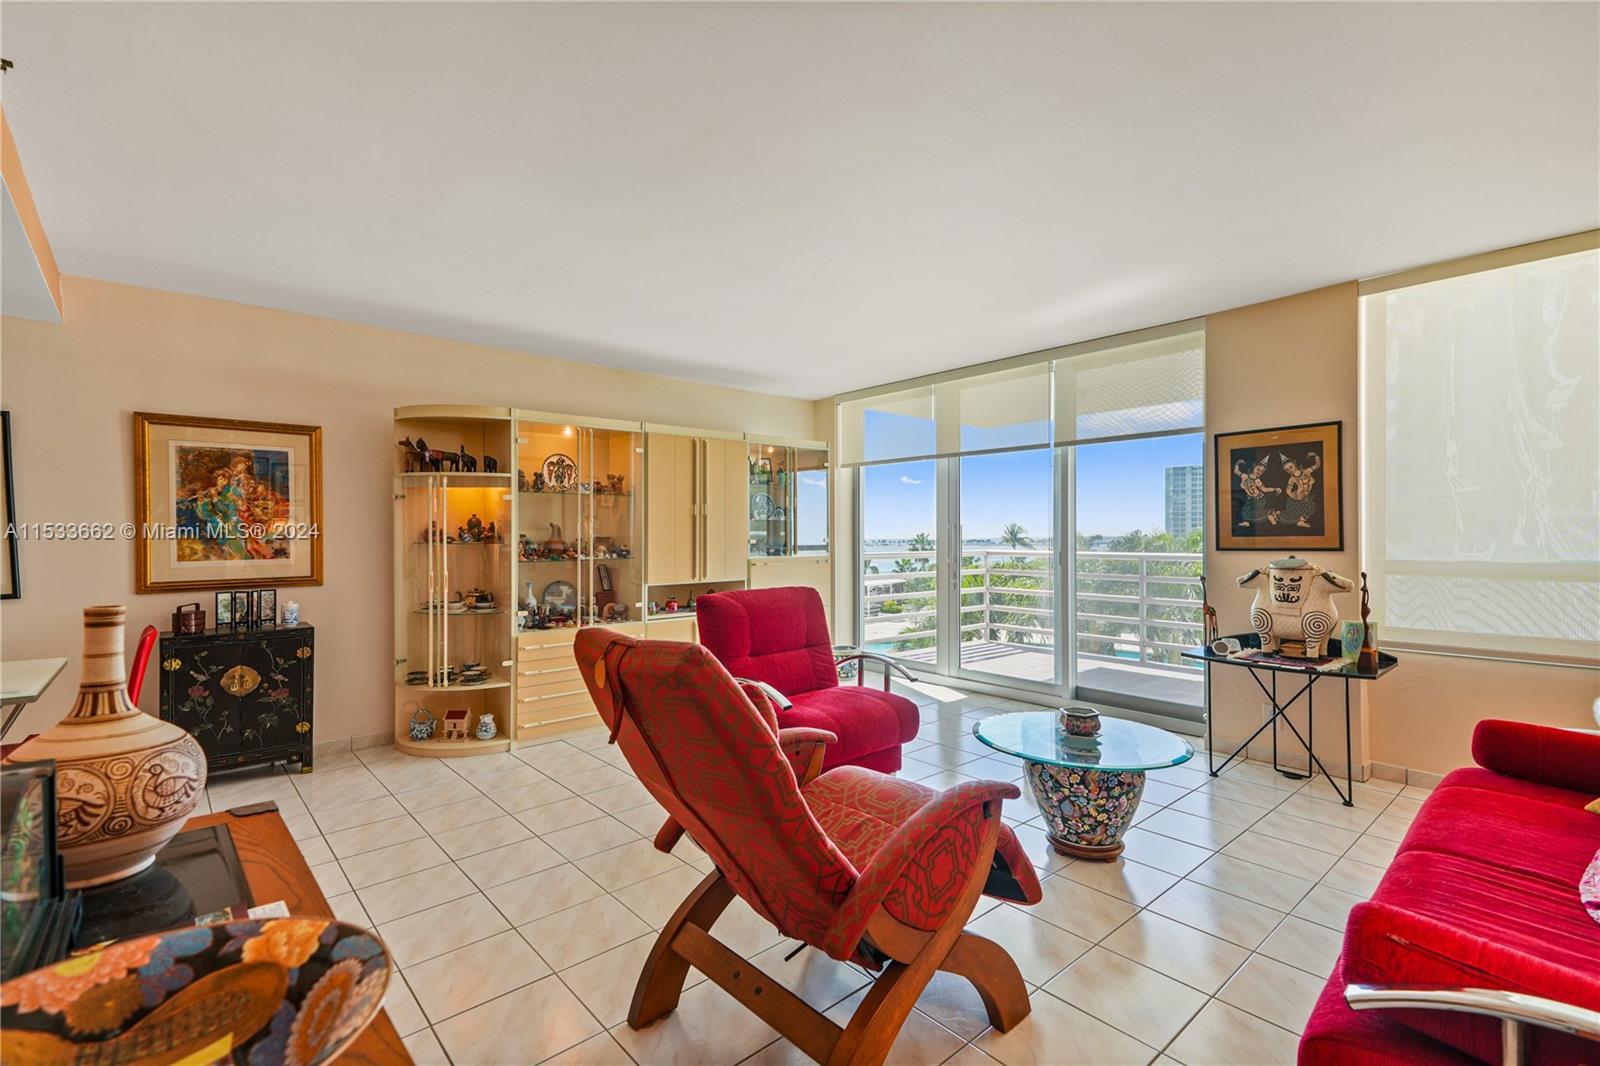 Nice oversized bay front unit ( 1/1/1.5).  Gorgeous views of Biscayne Bay 24/7.
Experience  luxury 